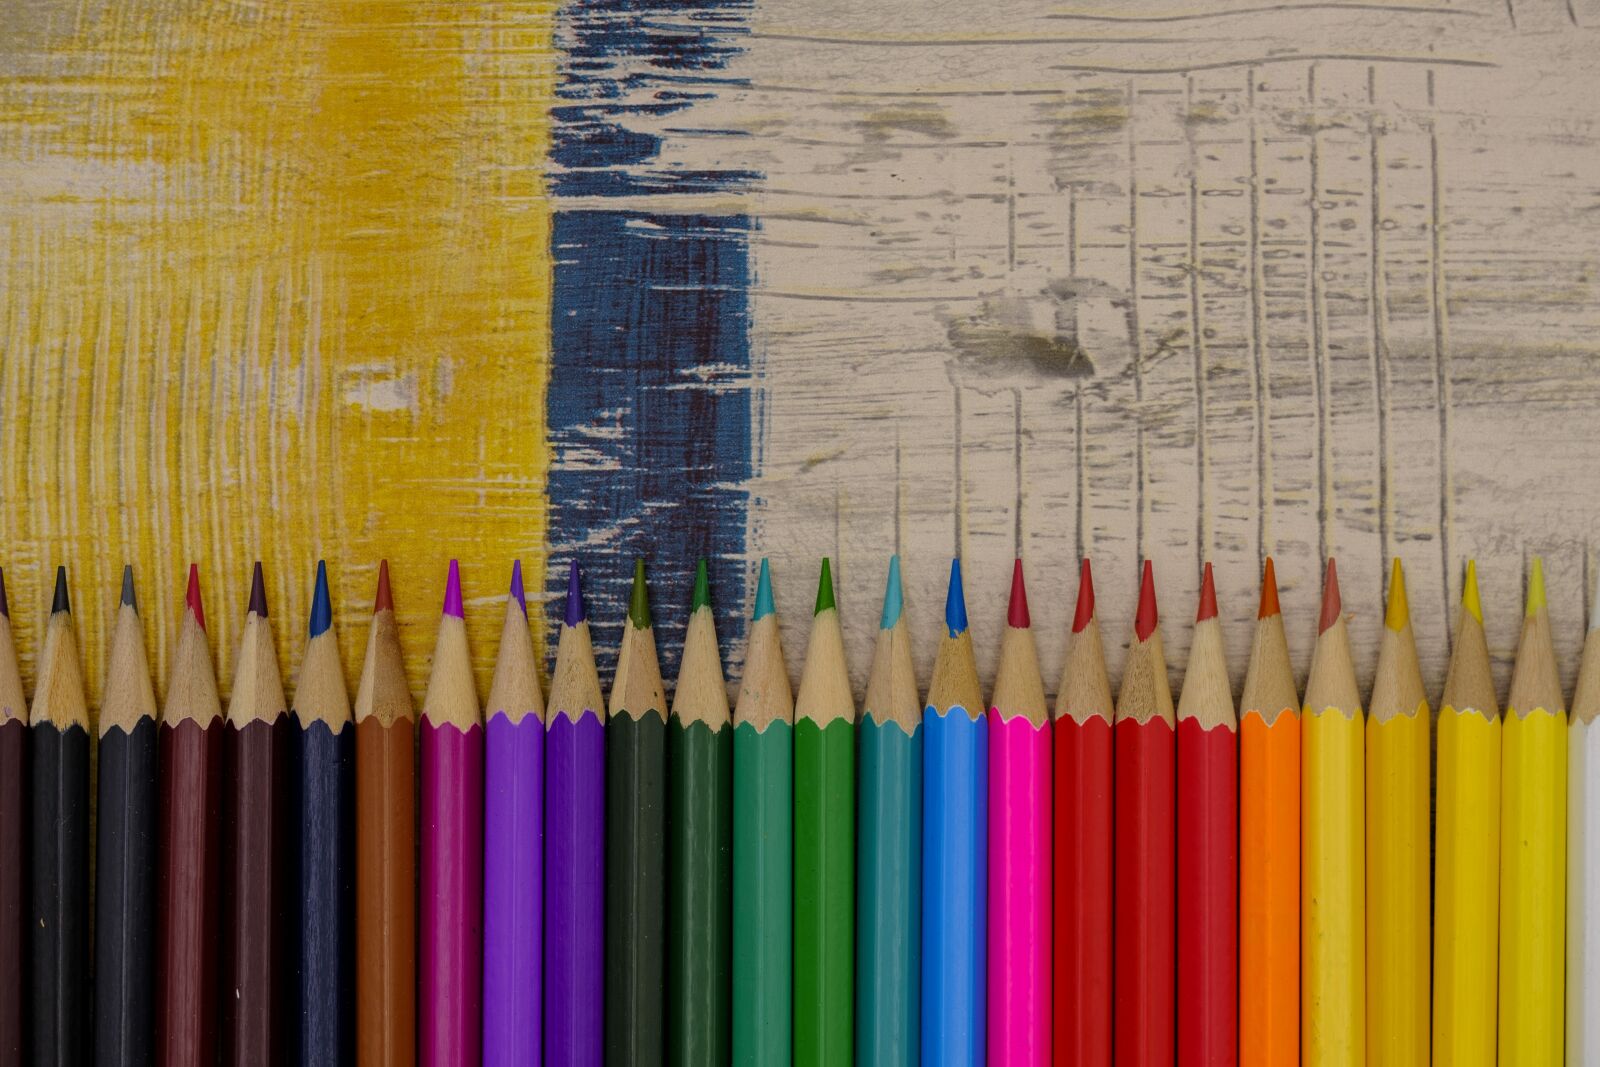 Fujifilm X-T2 sample photo. Colored pencils, pens, crayons photography